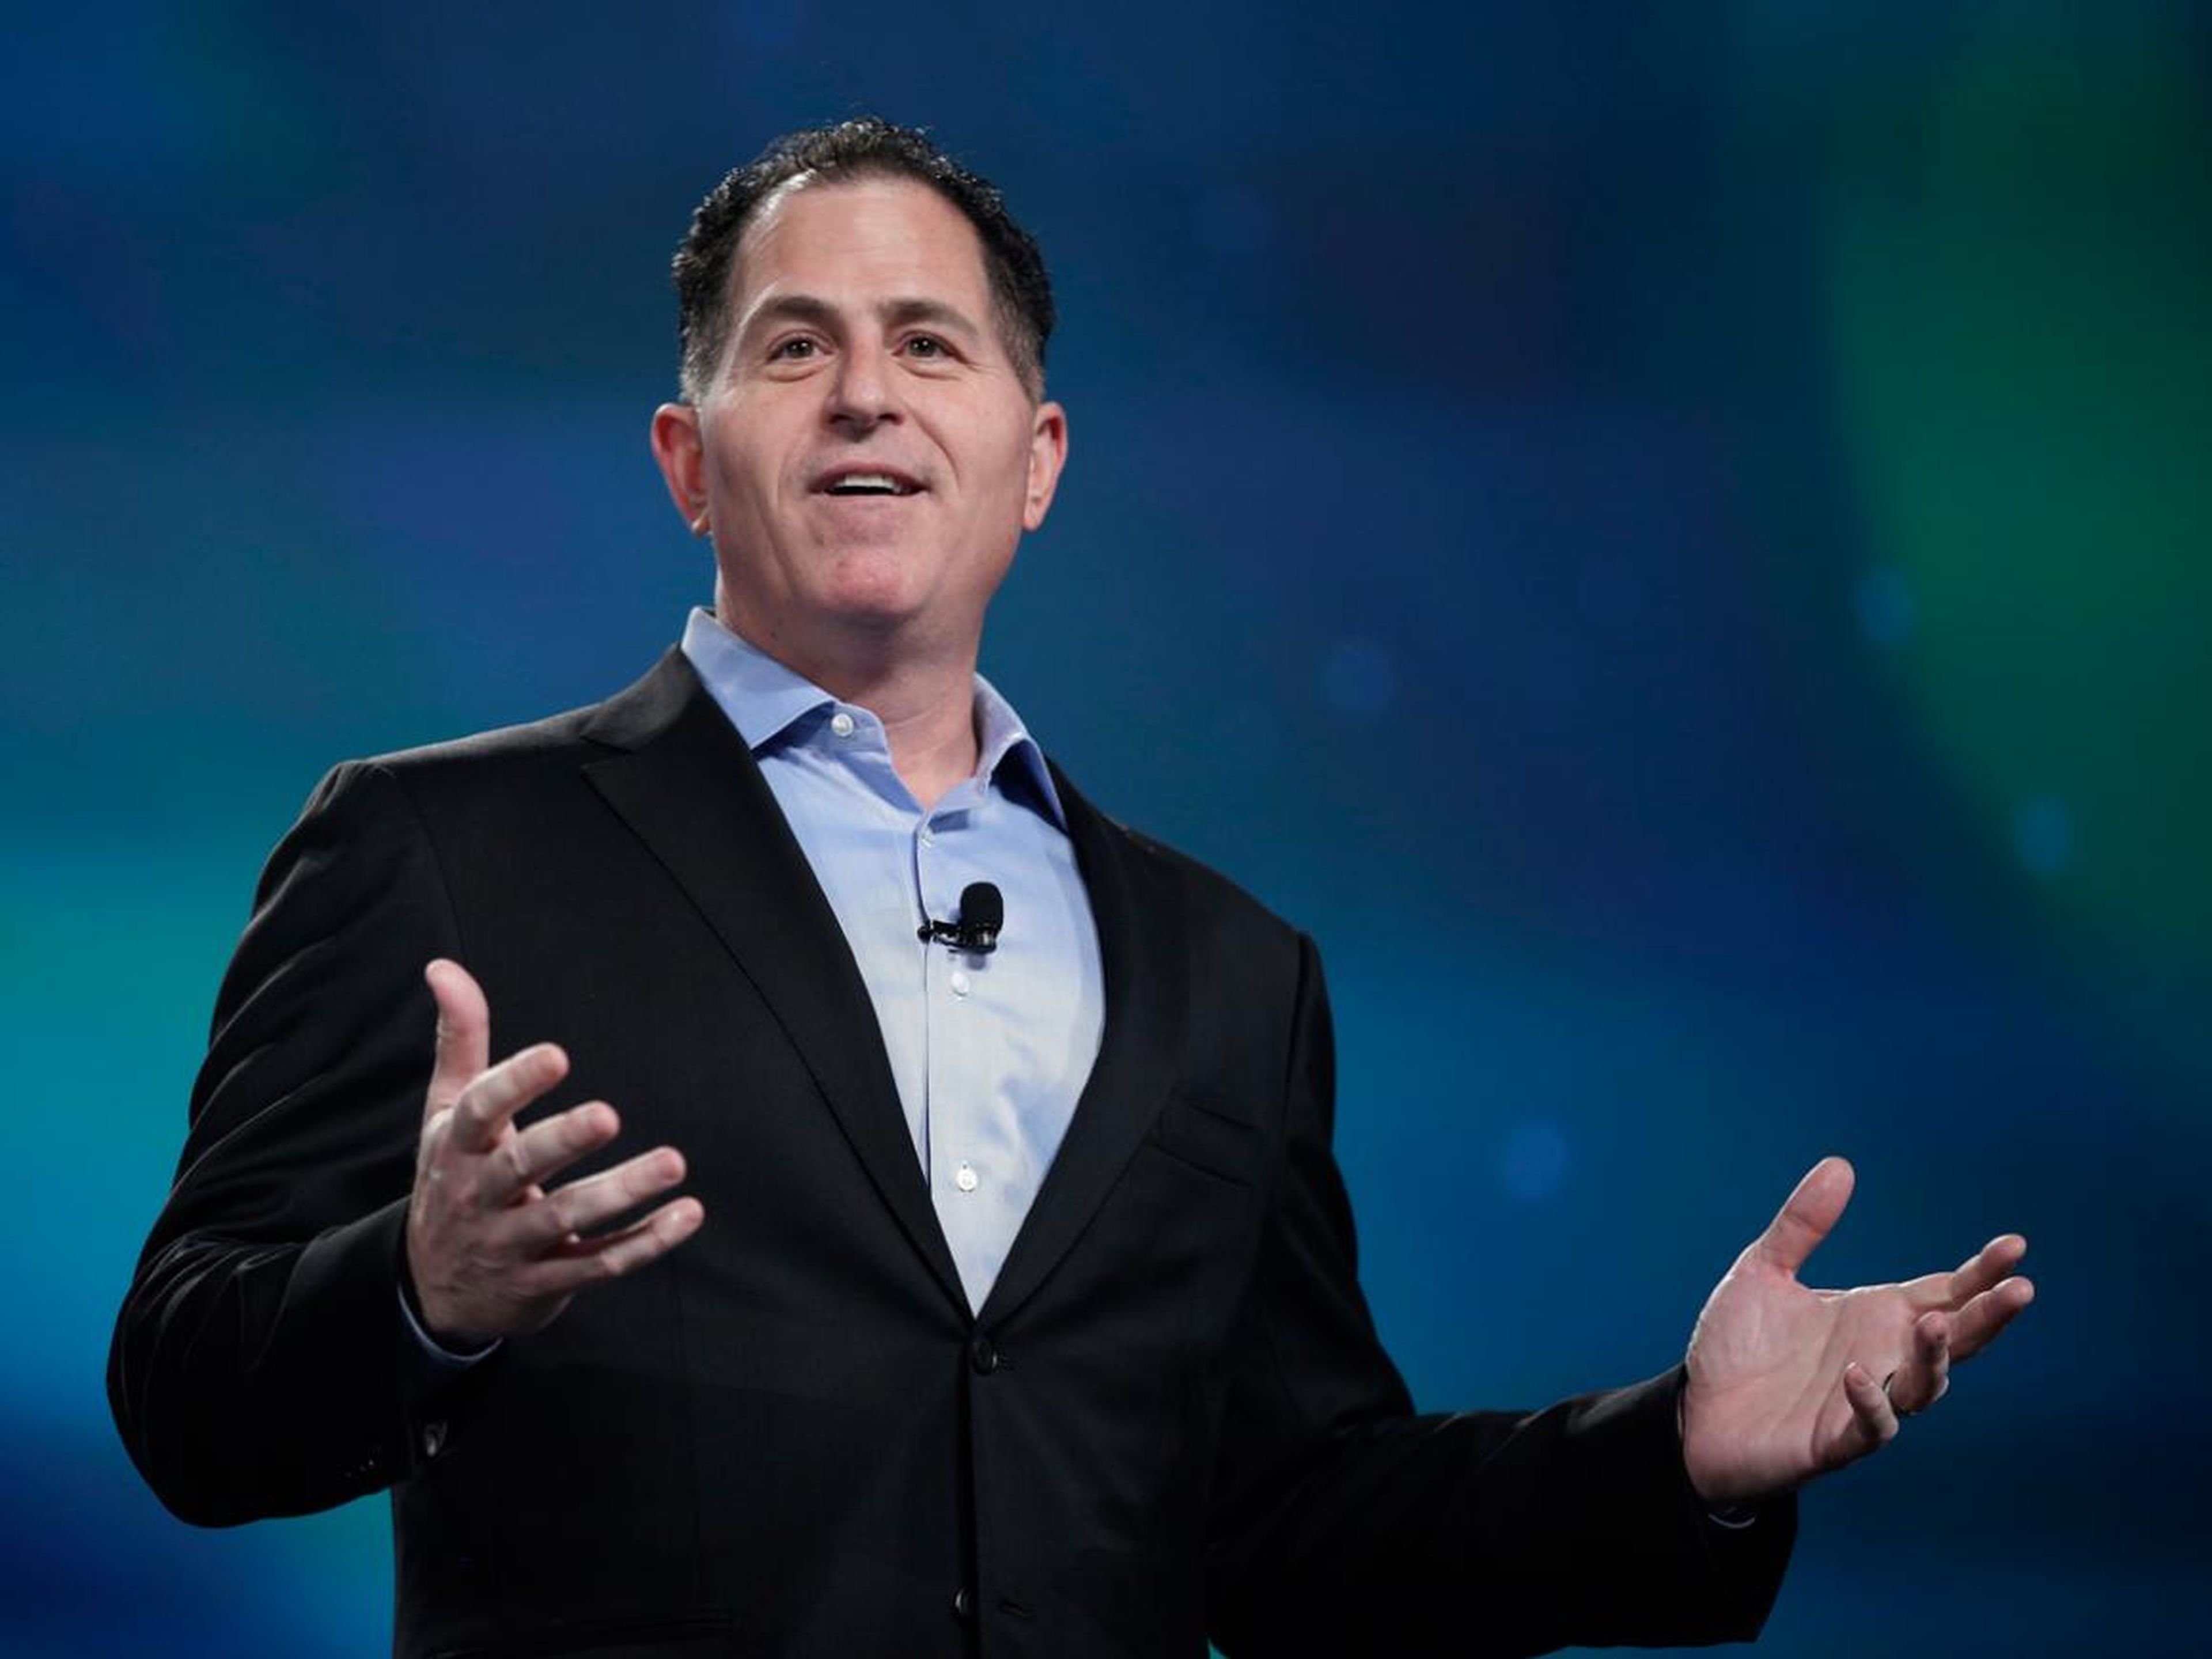 12. Michael Dell, founder and CEO of Dell Technologies. Net worth: £16.8 billion ($22.8 billion). Dell is the world's largest privately held technology company.